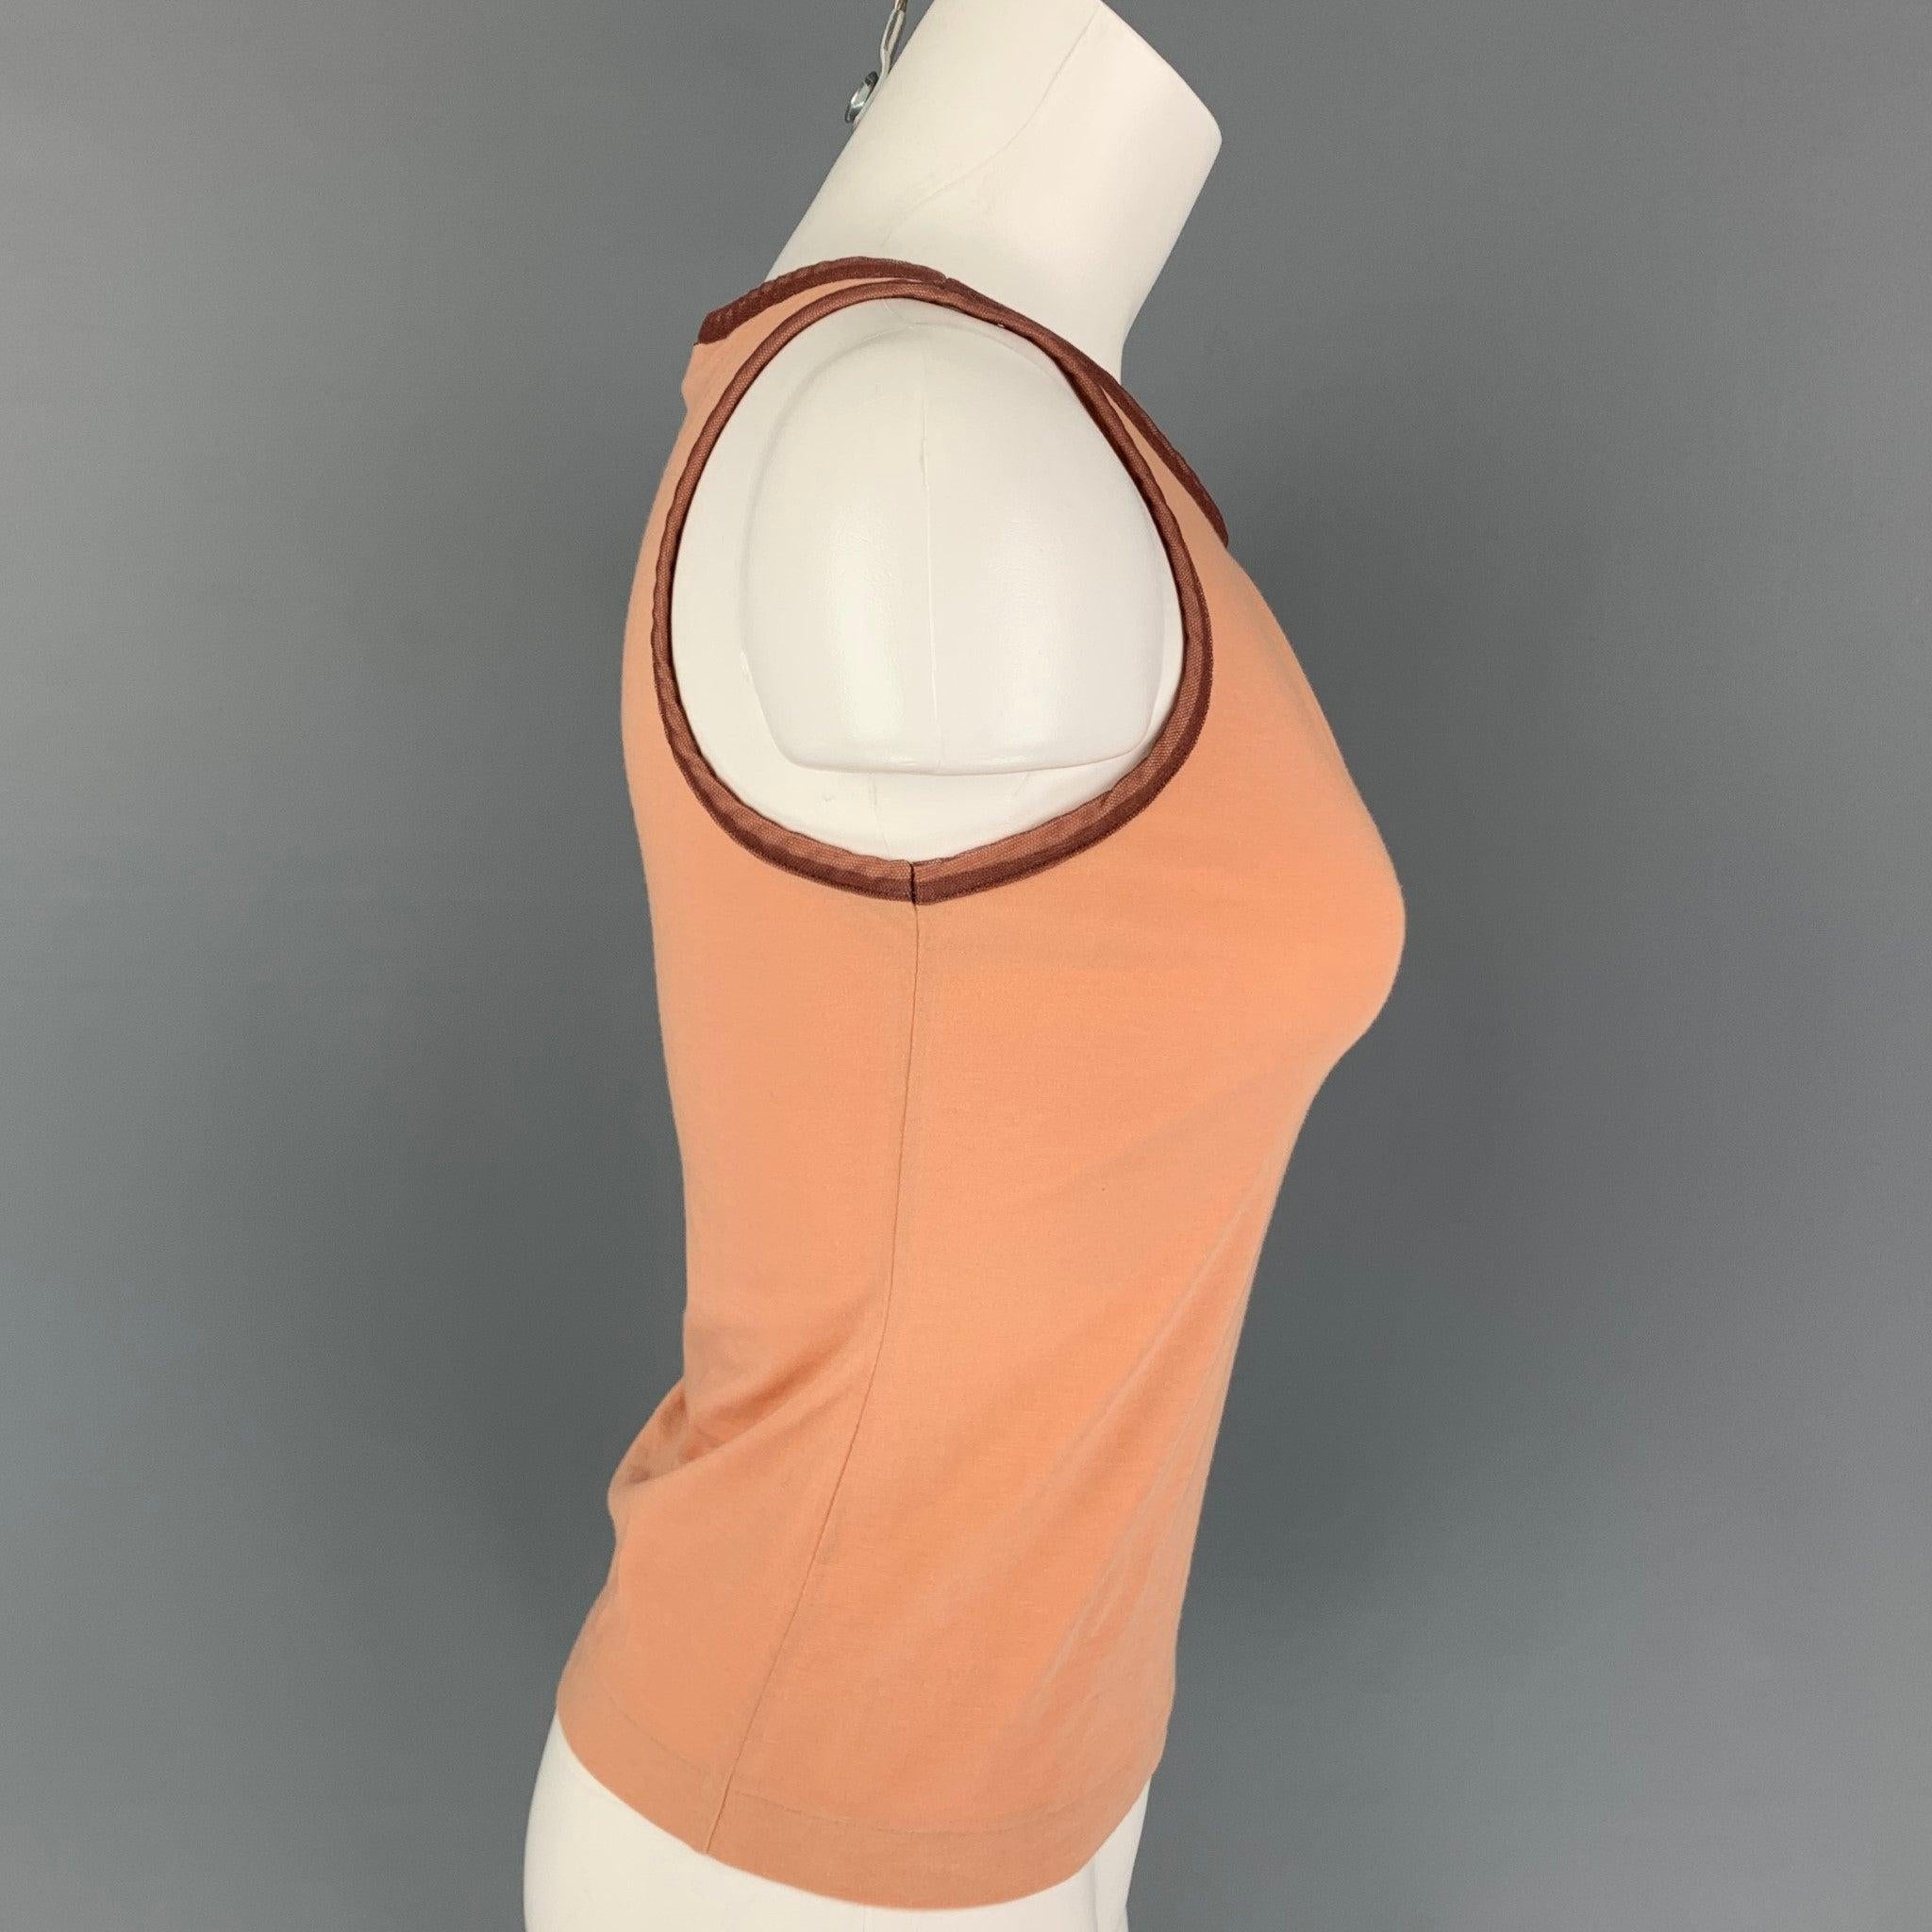 JIL SANDER tank top comes in a orange cotton featuring a mesh contrast trim.Very Good
Pre-Owned Condition. 

Marked:   Size tag removed.  

Measurements: 
 
Shoulder:
10.5 inches  Bust: 30 inches  Length: 19.5 inches 
  
  
 
Reference: